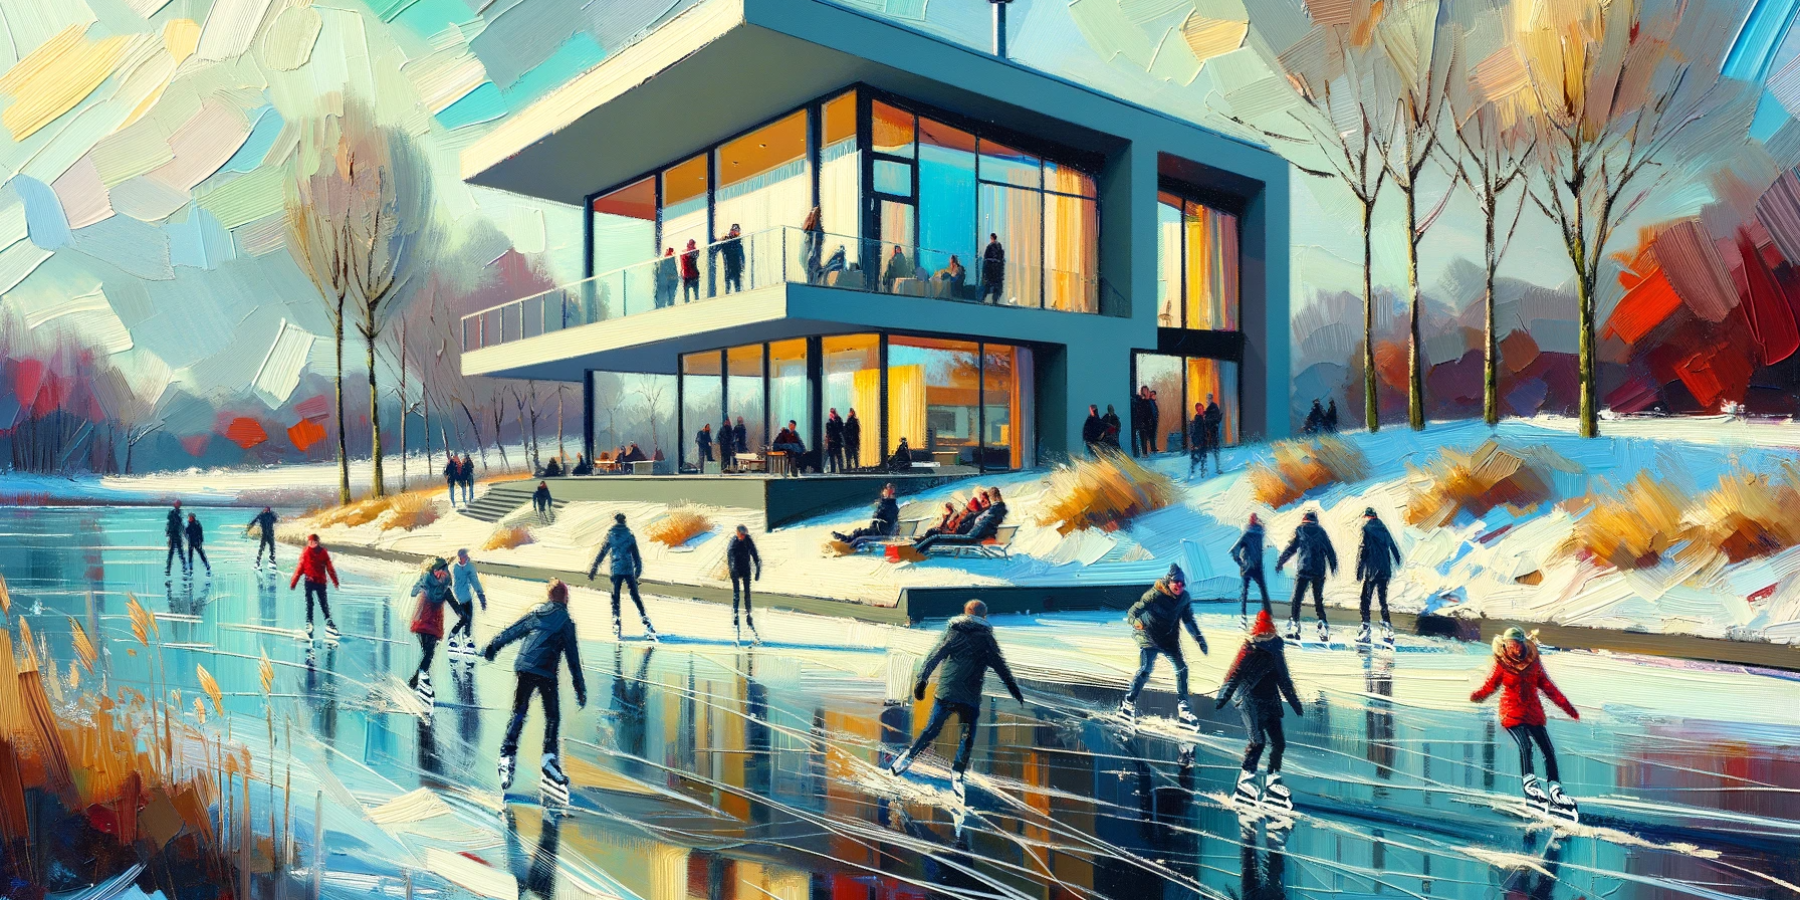 DALL·E 2024-01-08 09.59.07 - An impressionistic image of a modern Swedish architectural house in the Netherlands by a frozen lake, with people ice skating. The scene is painted in